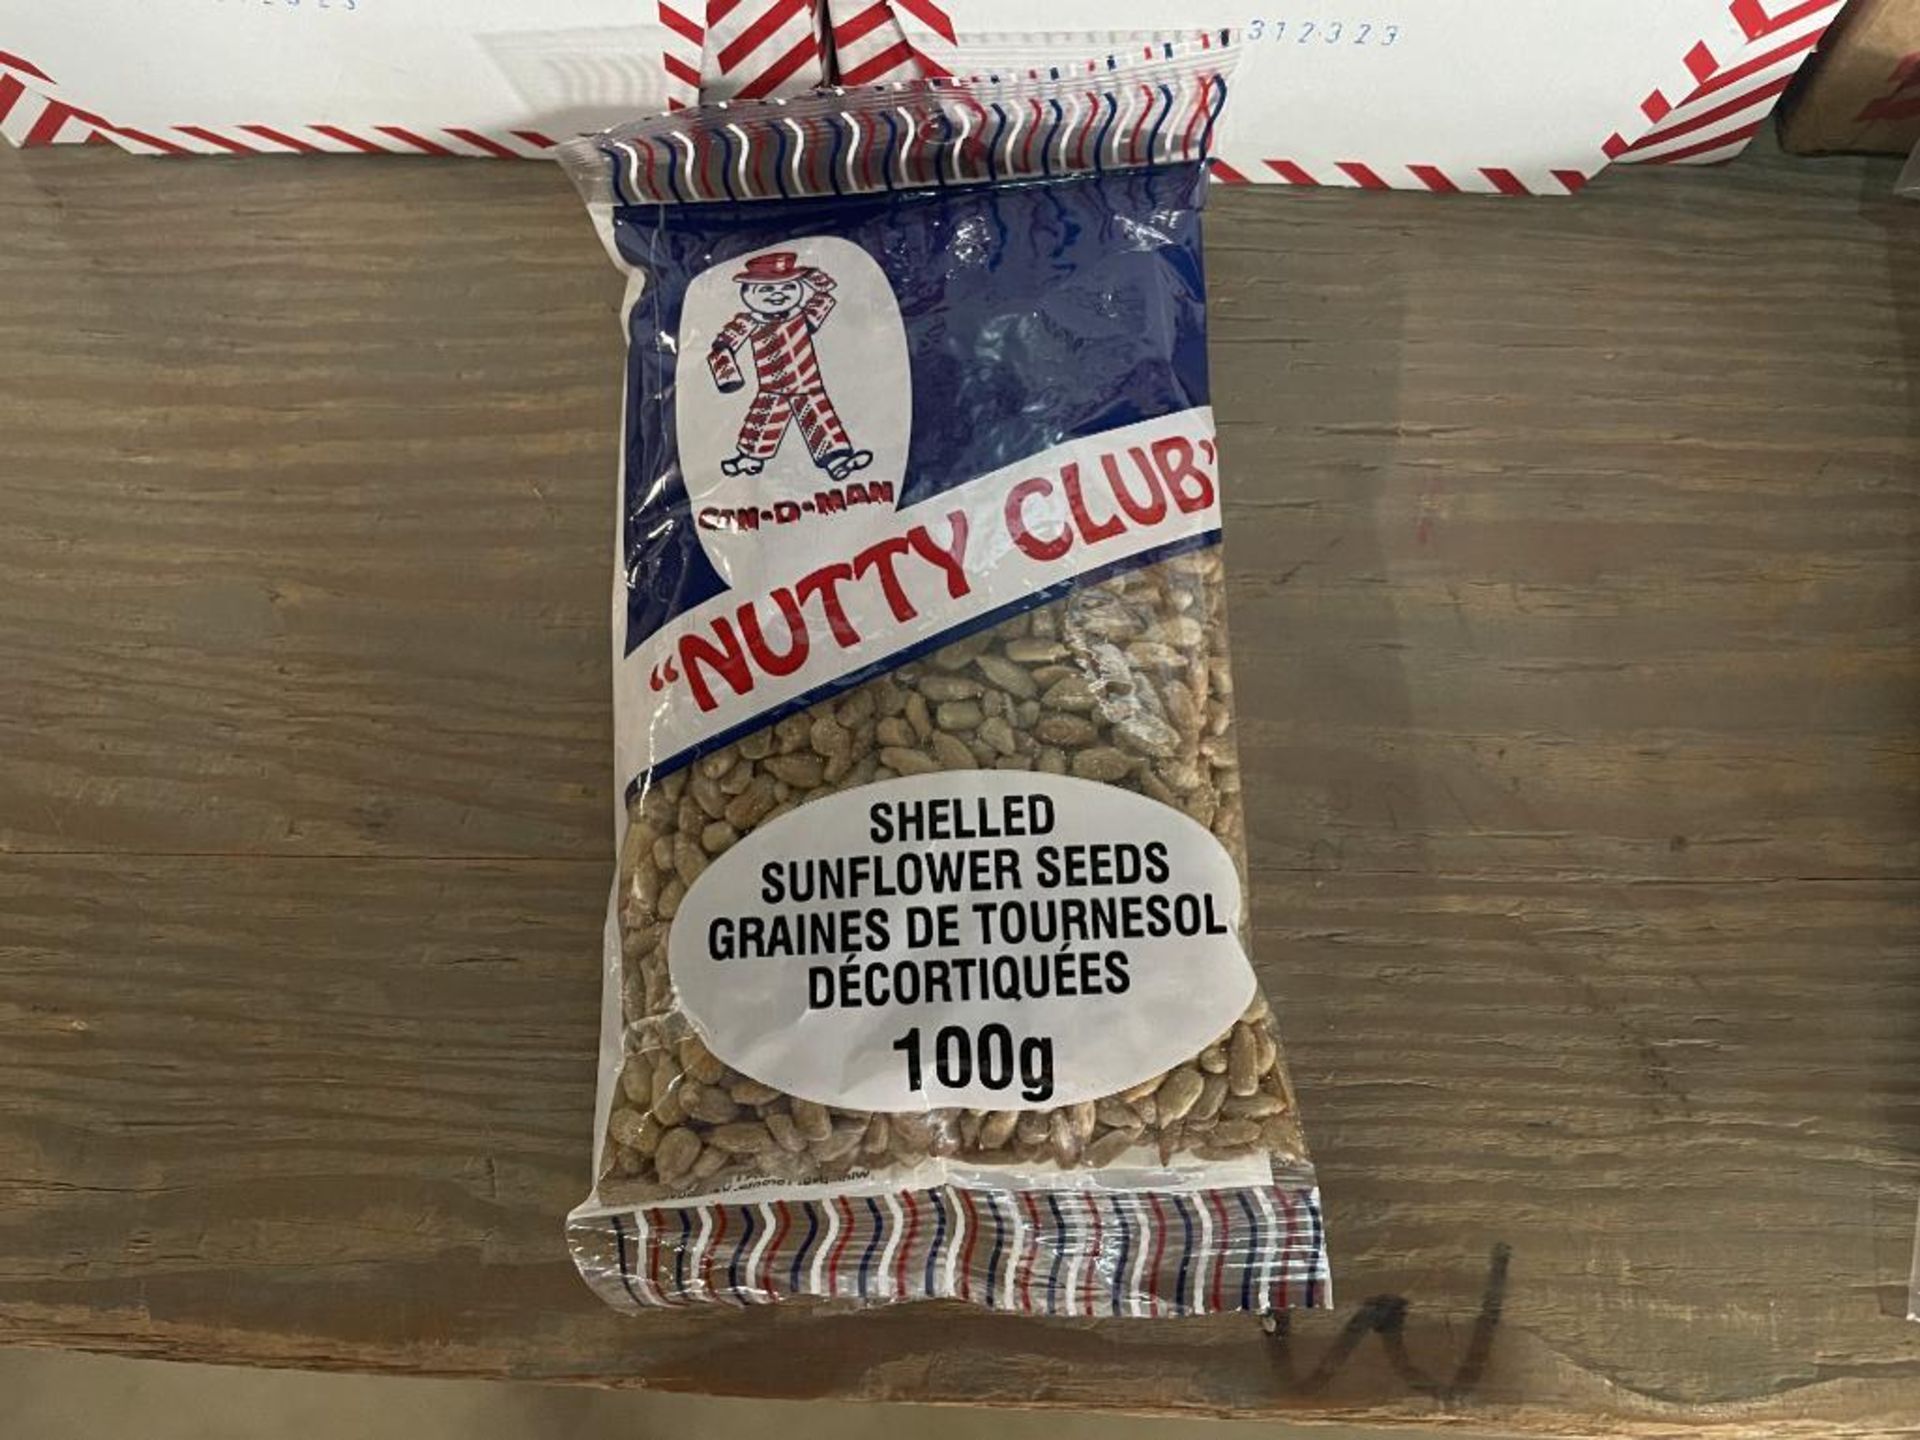 (10) BOXES OF NUTTY CLUB SHELLED SUNFLOWER SEEDS, (6) 12/100G PER BOX & (4) 12/10/18G PER BOX - Image 2 of 3